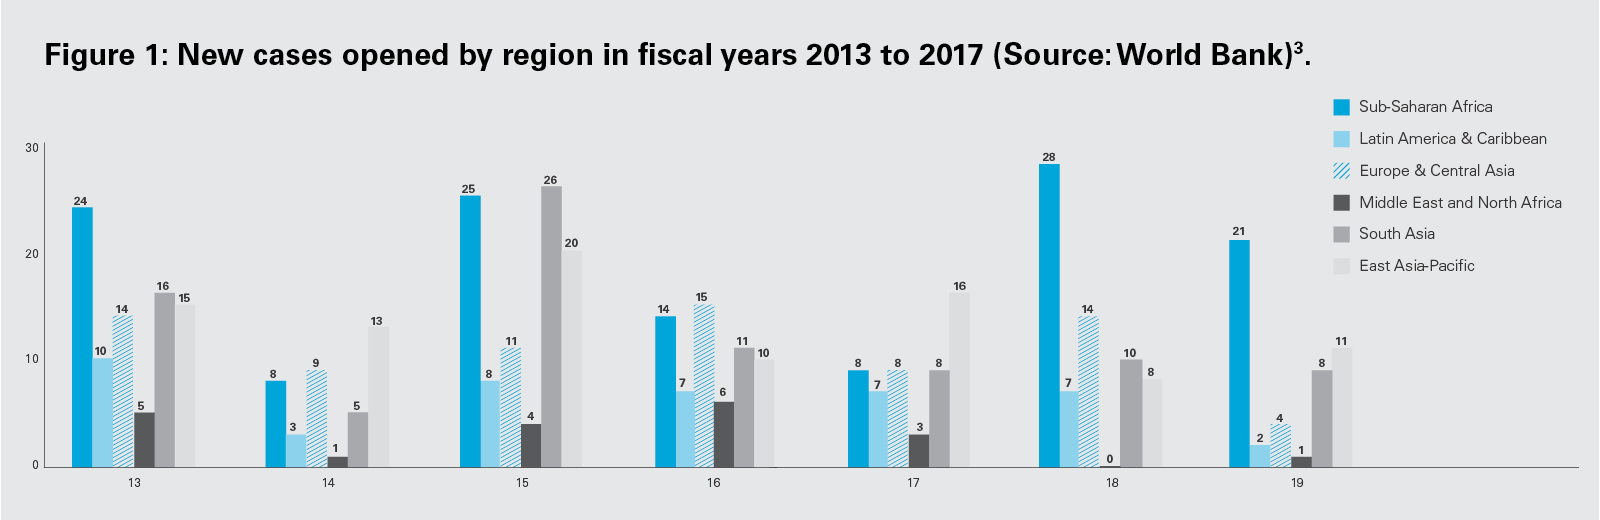 Figure 1: New cases opened by region in fiscal years 2013 to 2017 (PNG)